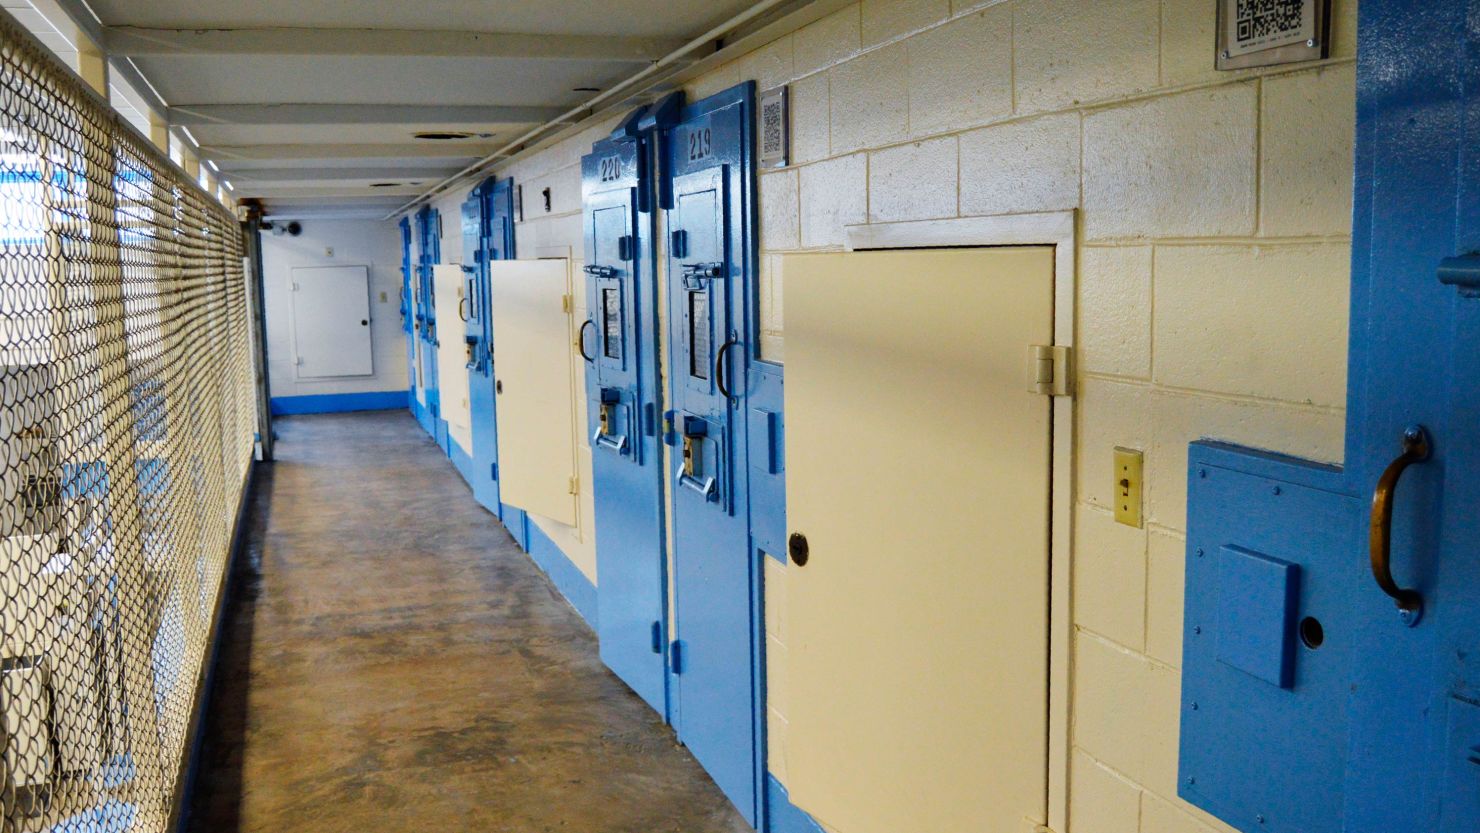 This undated file photo provided on July 11, 2019, by the South Carolina Department of Corrections shows the death row at Broad River Correctional Institution in Columbia, SC.